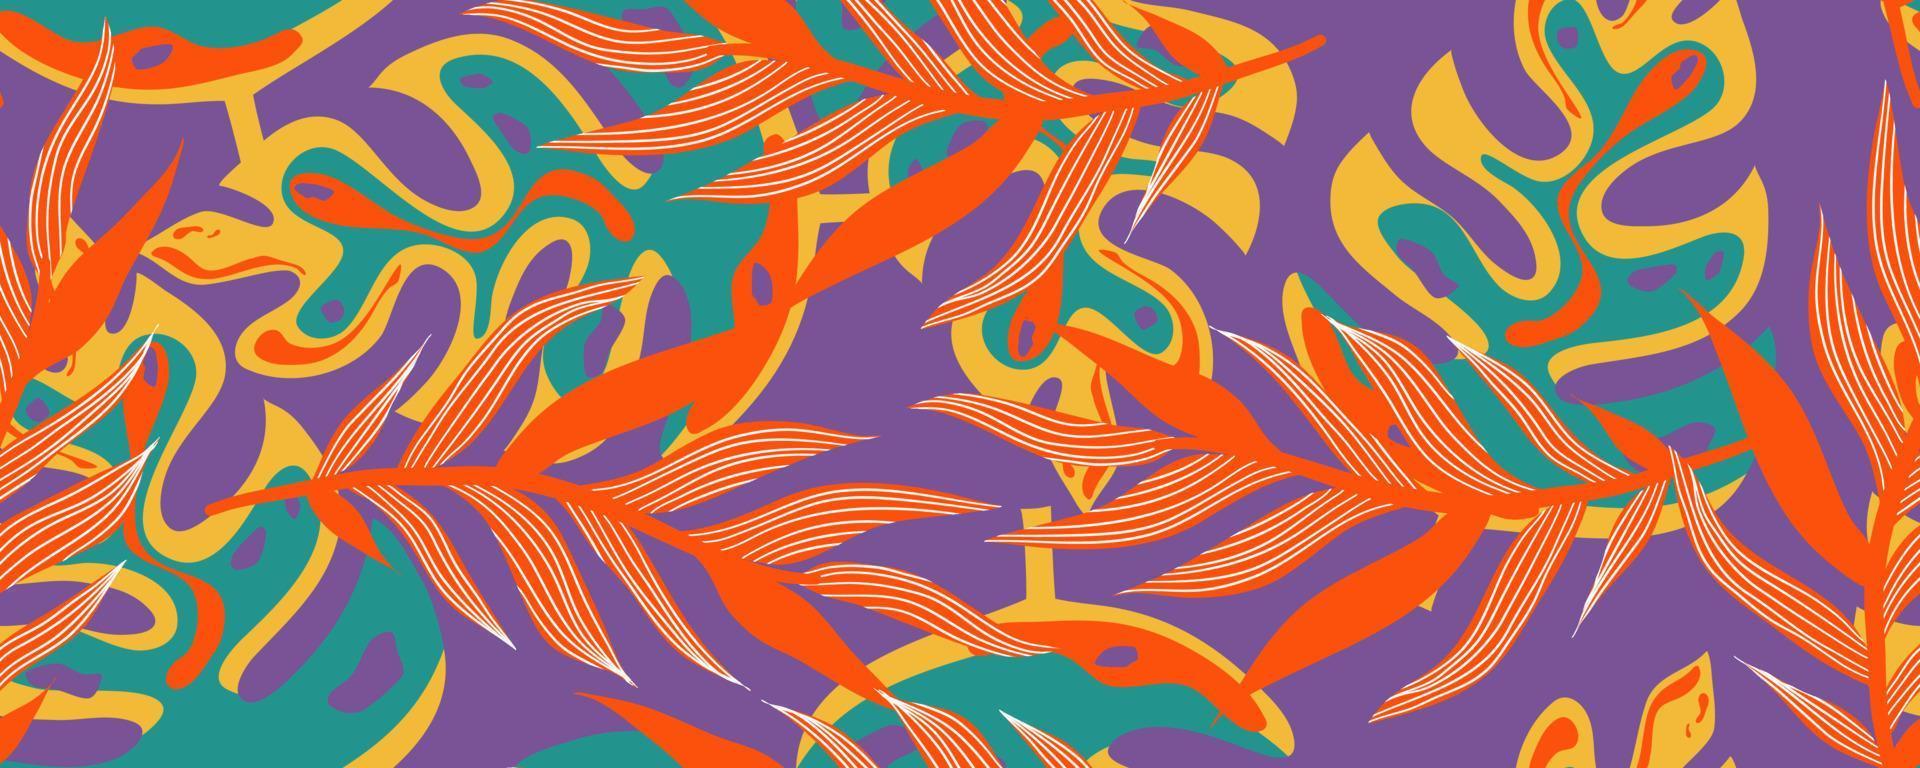 A purple background with orange, green and blue leaves and branches on it - Jungle